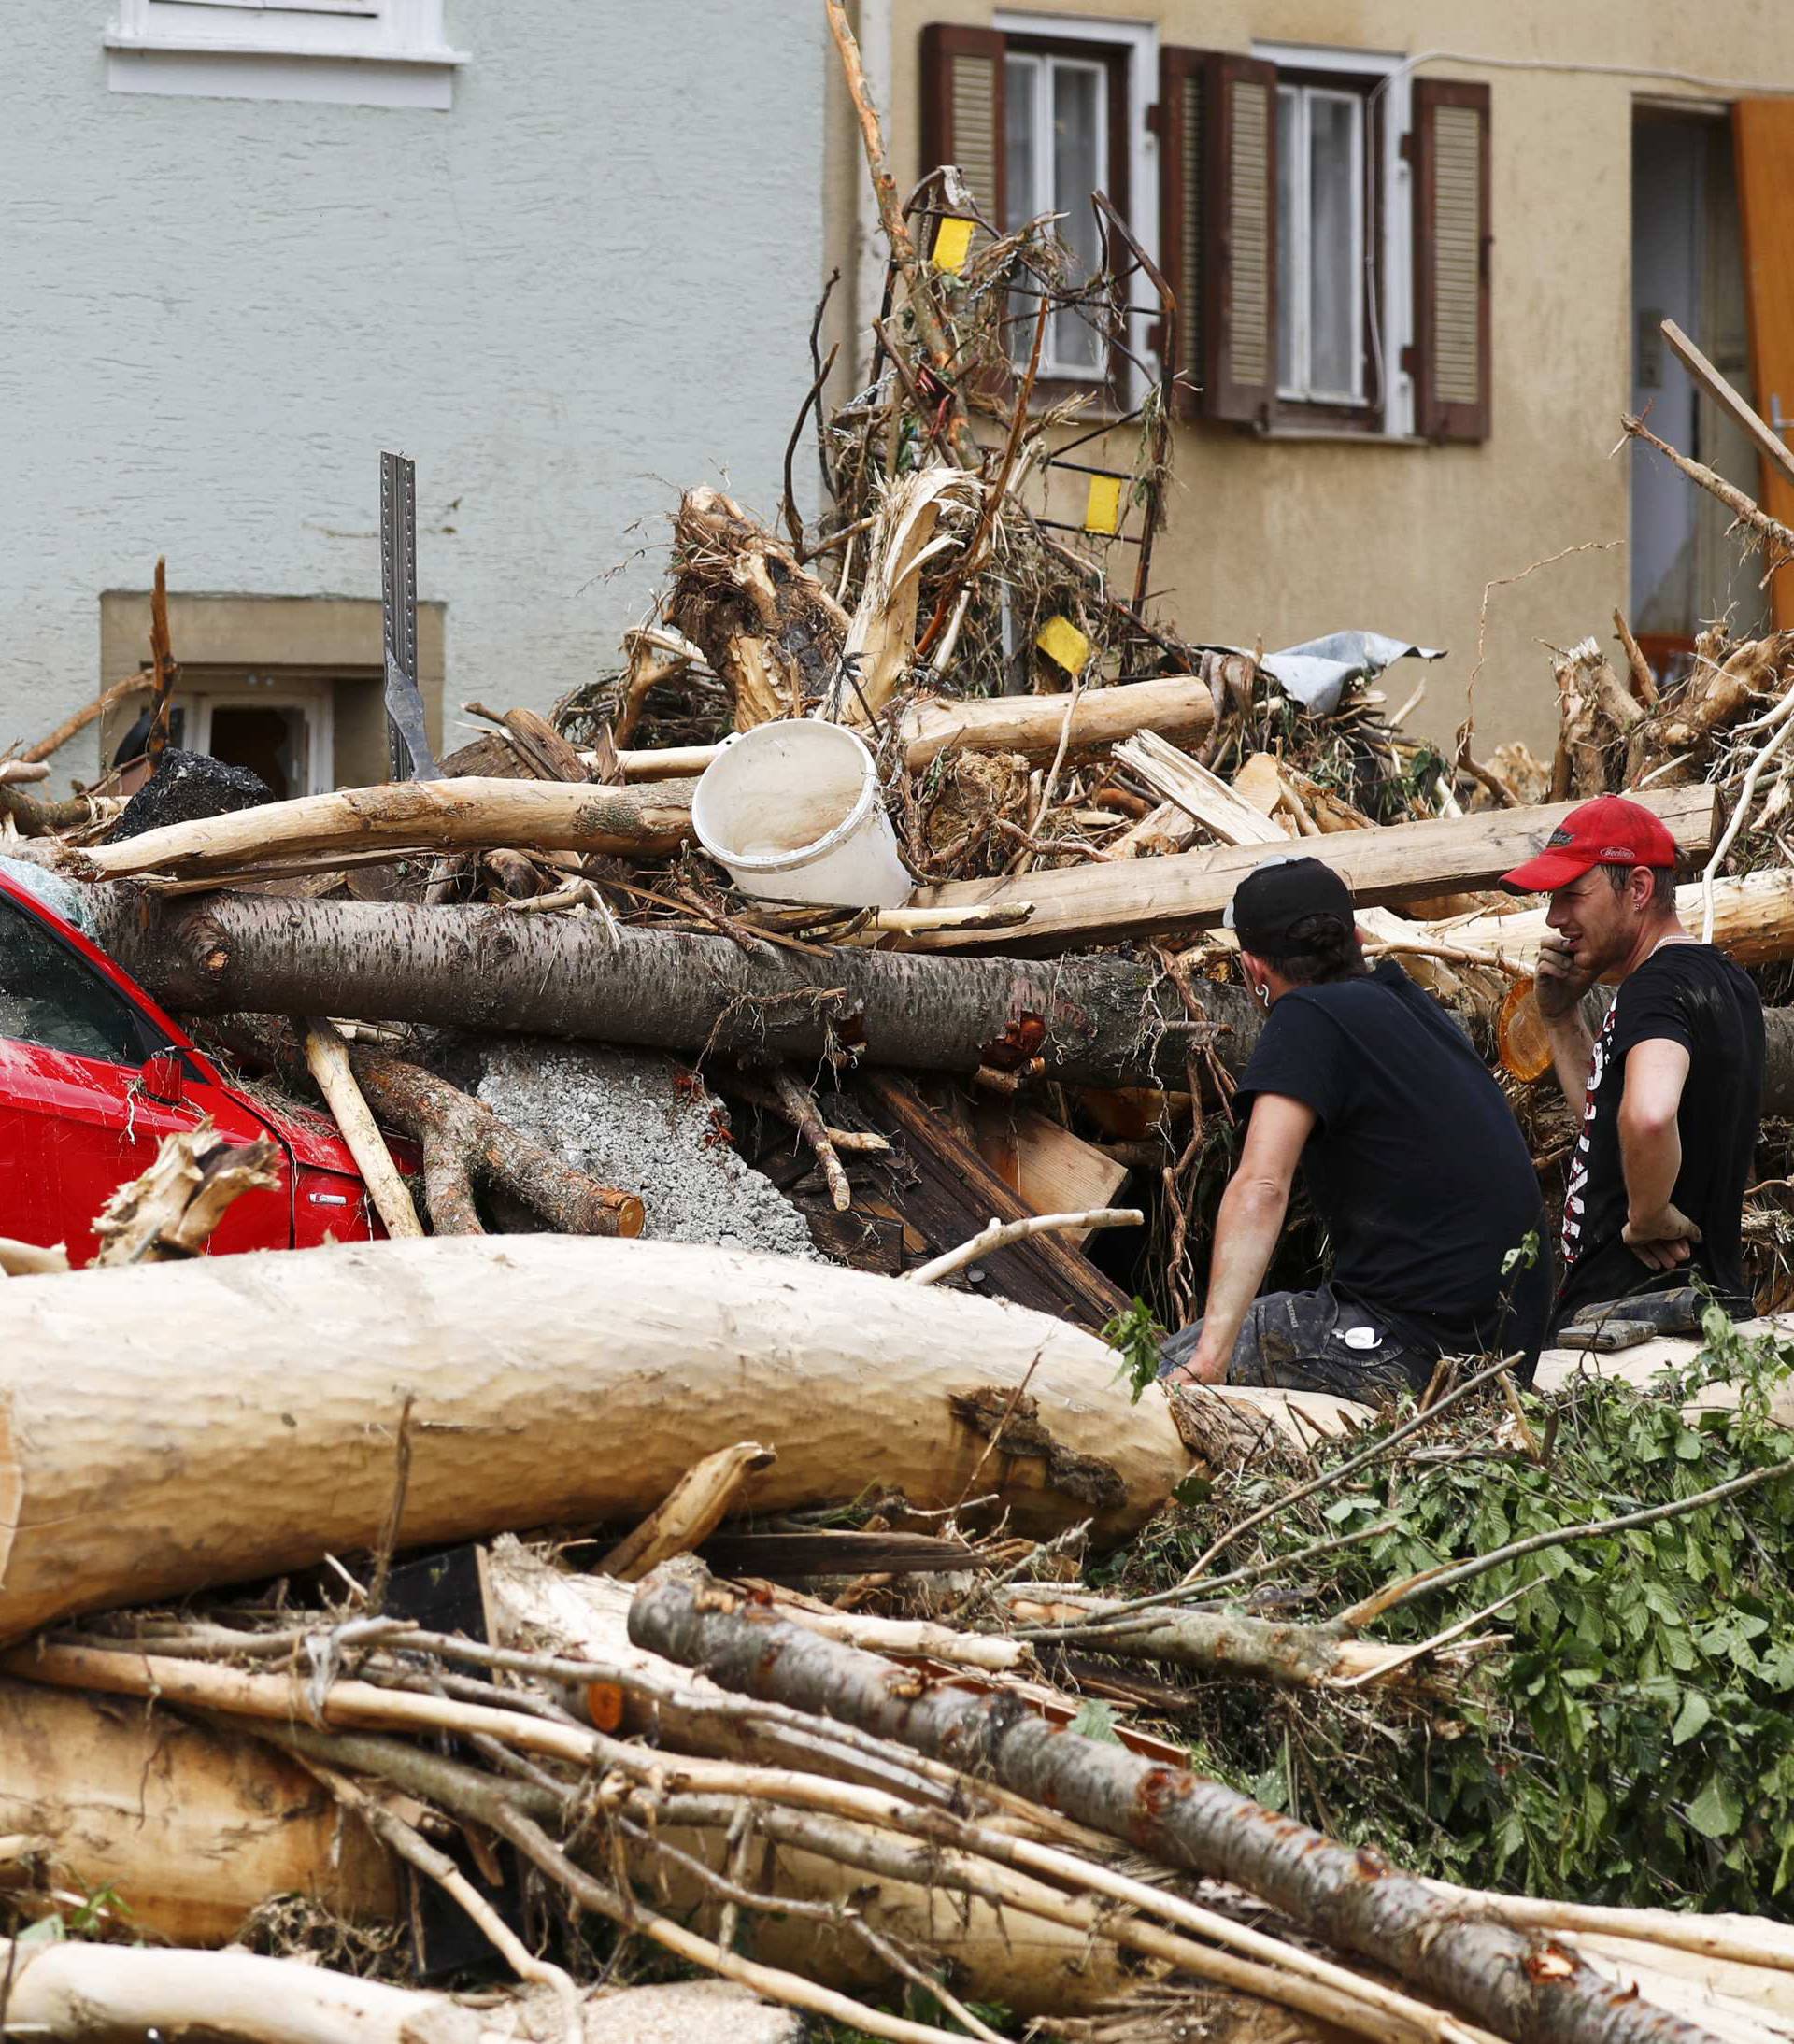 People damage damage caused by the floods in the town of Braunsbach in Baden-Wuerttemberg